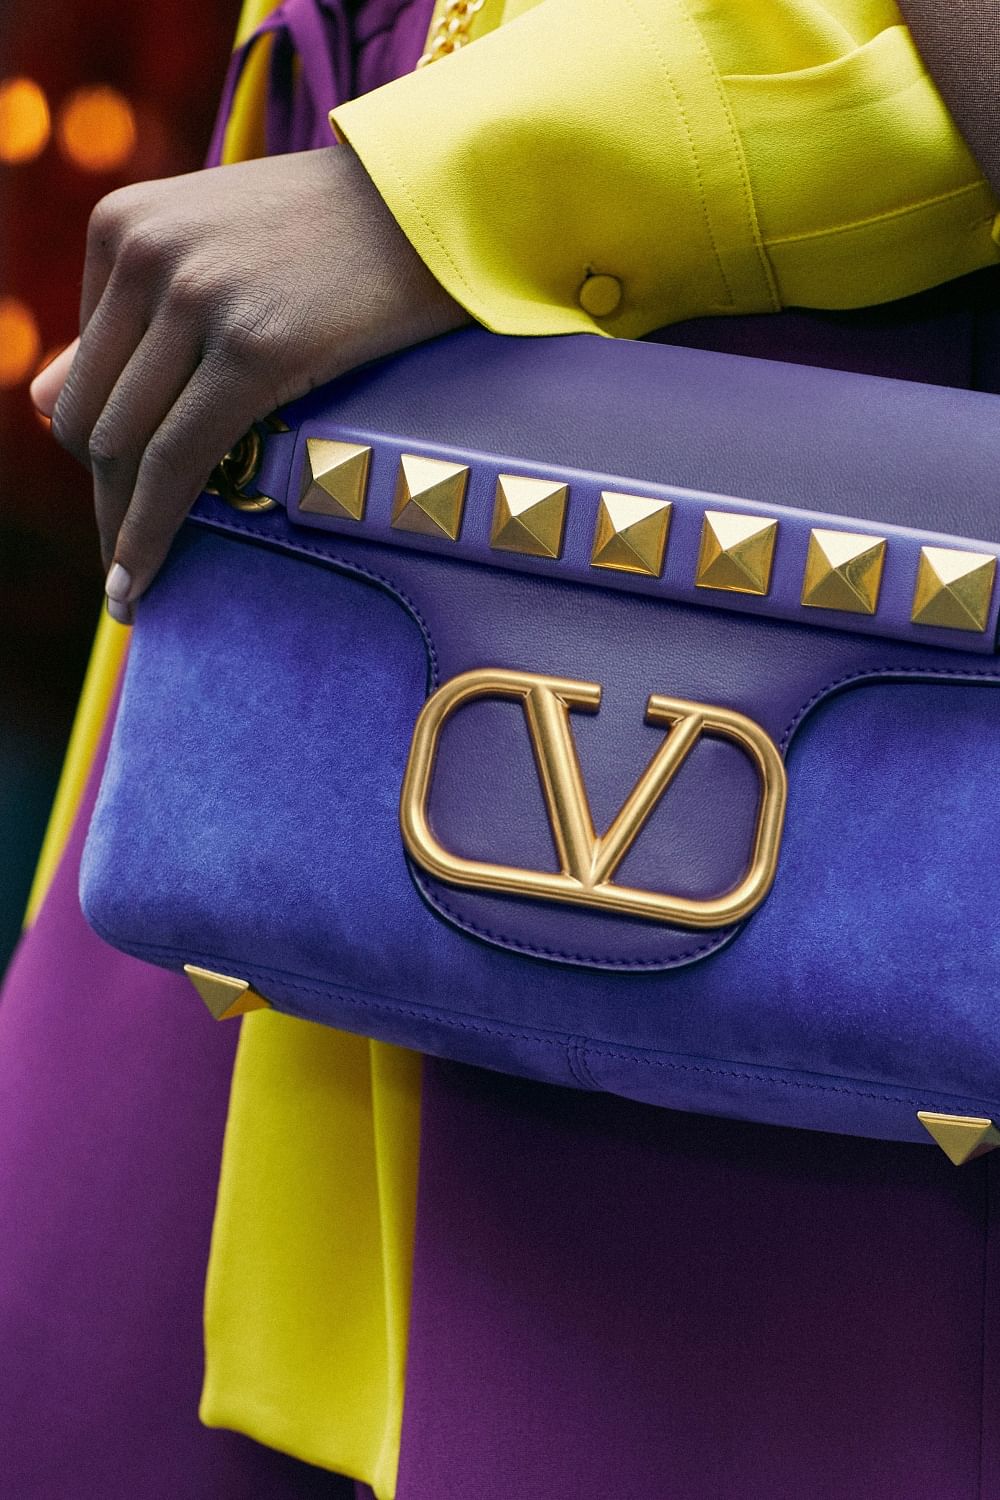 The Valentino Garavani Stud Sign Is The Latest Bag You Need To Cop